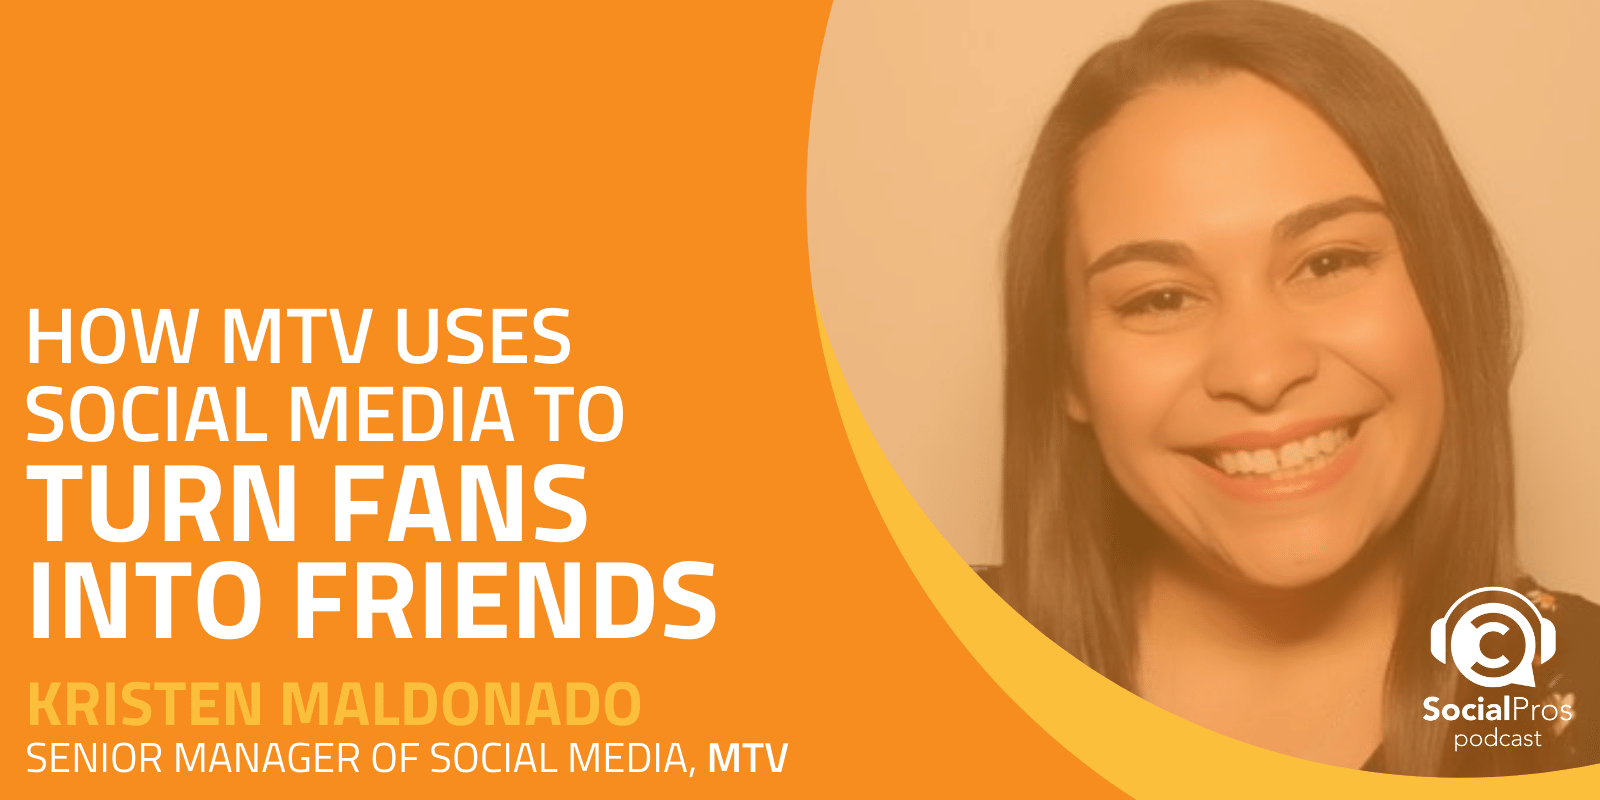 How MTV Uses Social Media to Turn Fans into Friends